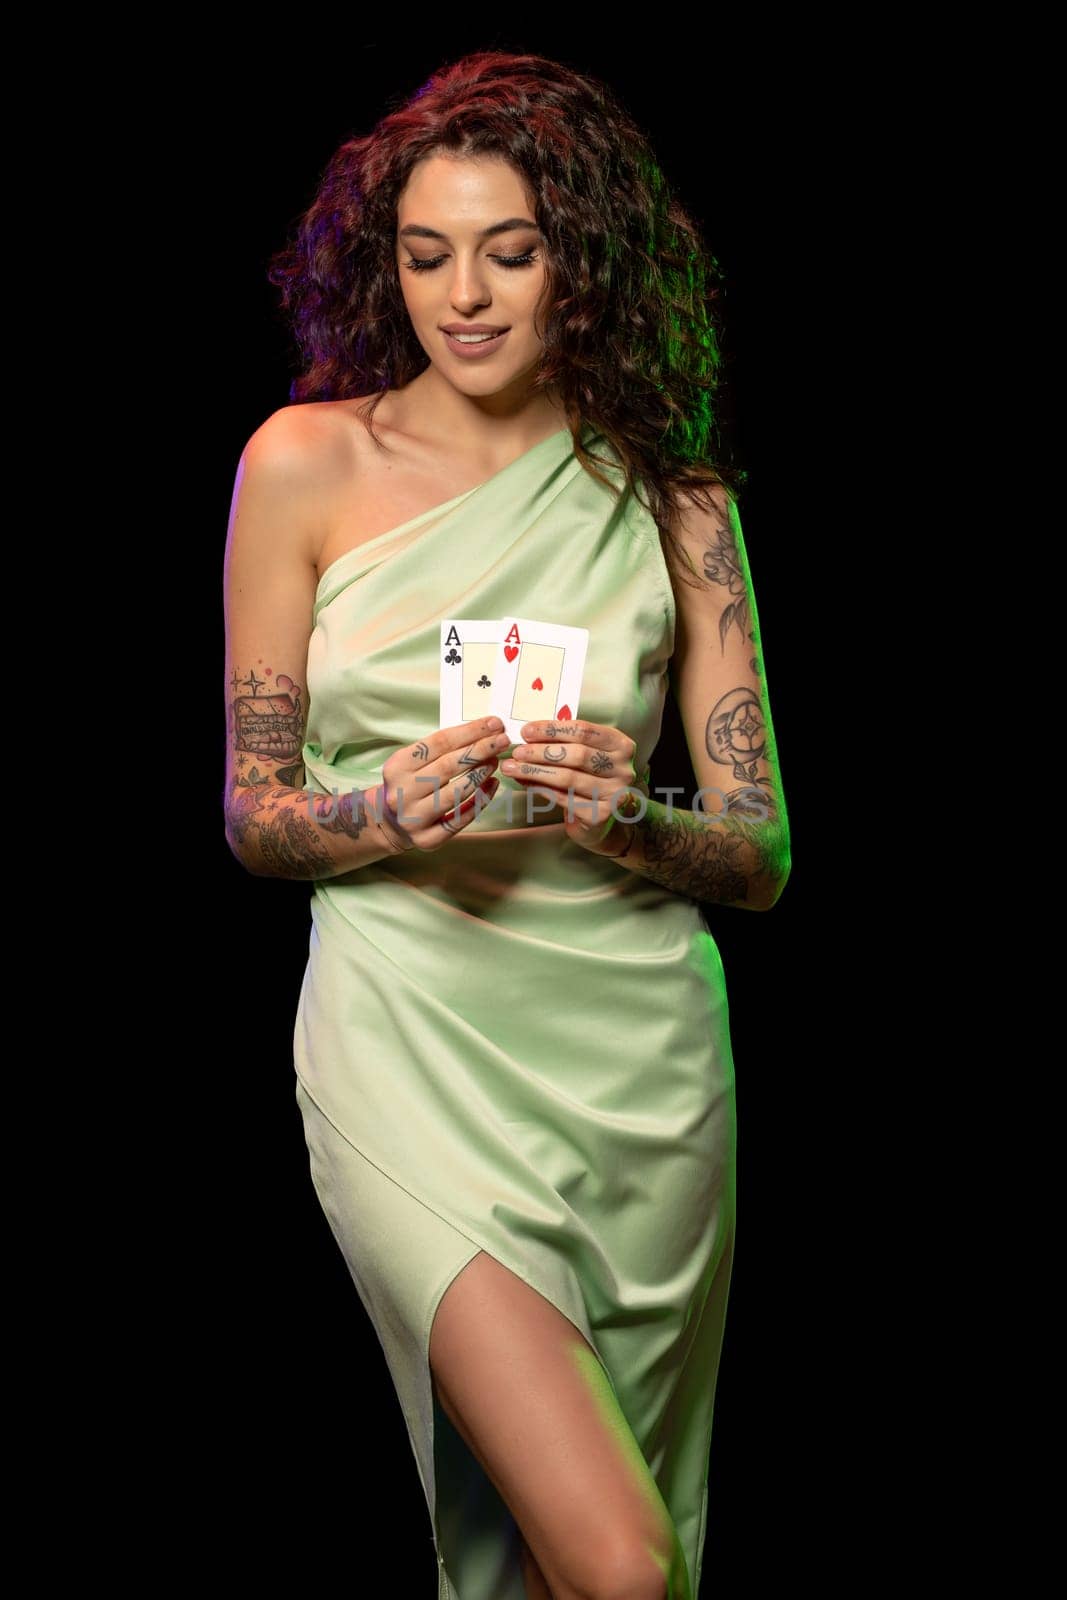 Lucky young brown-haired girl in elegant light green dress satisfied with successful poker game standing against black background, showing set of winning cards from pair of aces. Fortune smiling